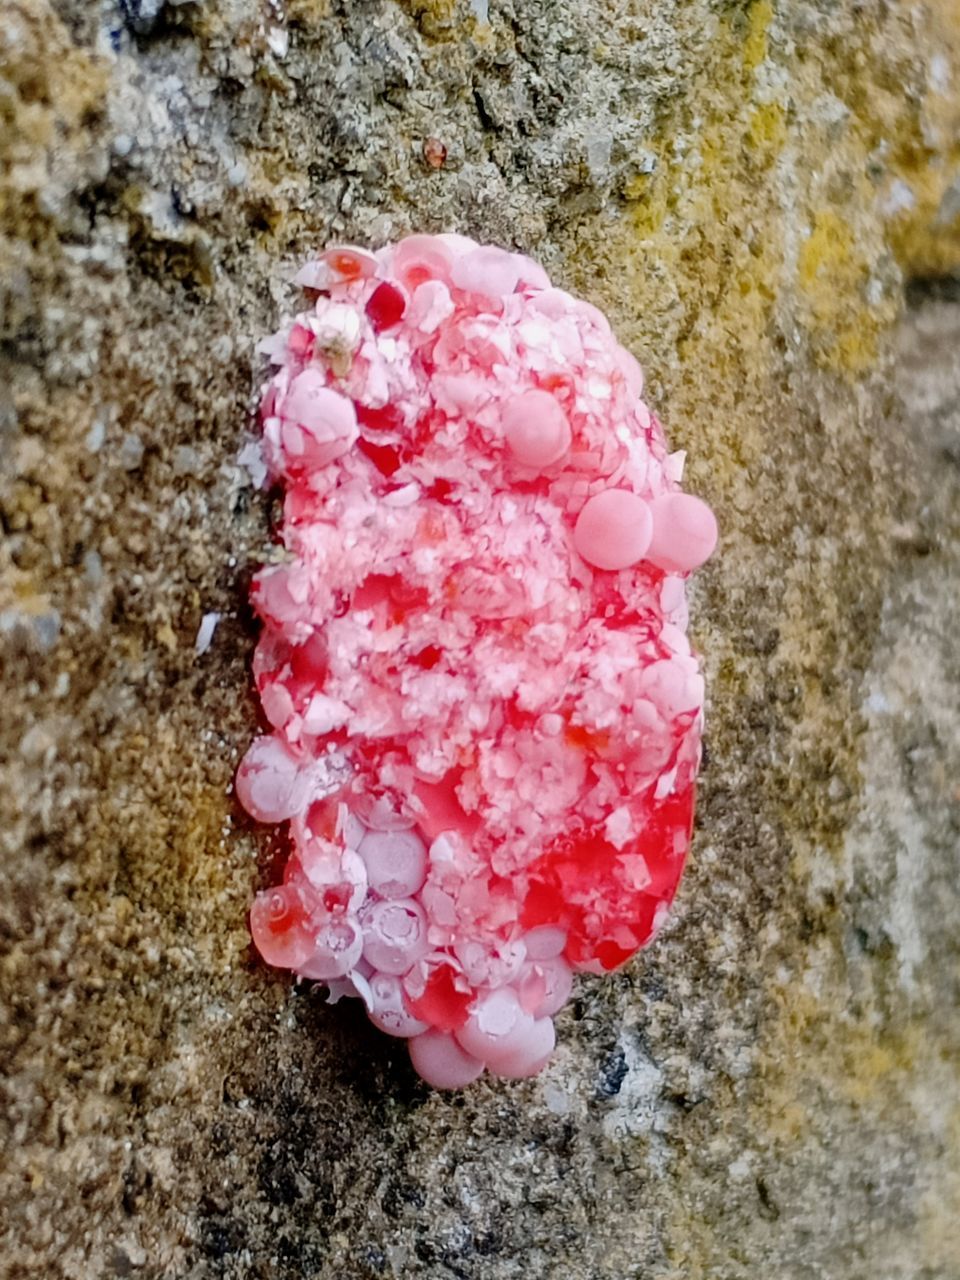 HIGH ANGLE VIEW OF PINK ICE CREAM CONE ON GROUND